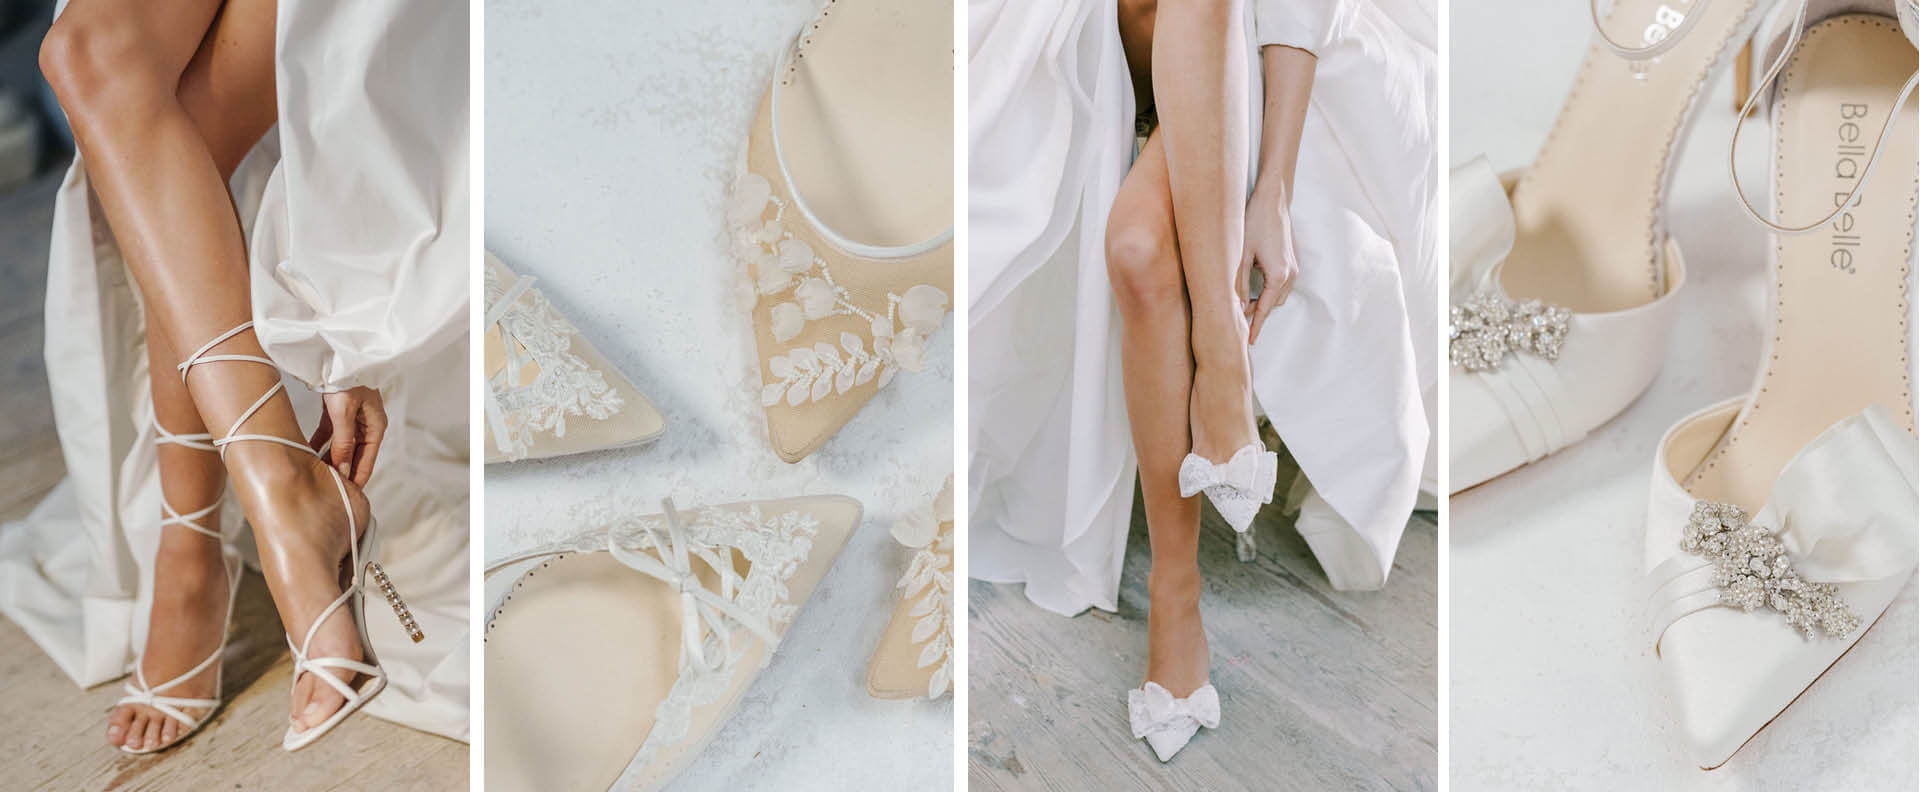 40 of our Favorite Wedding Shoes for 2022 - Bridal Shoes, Wedding